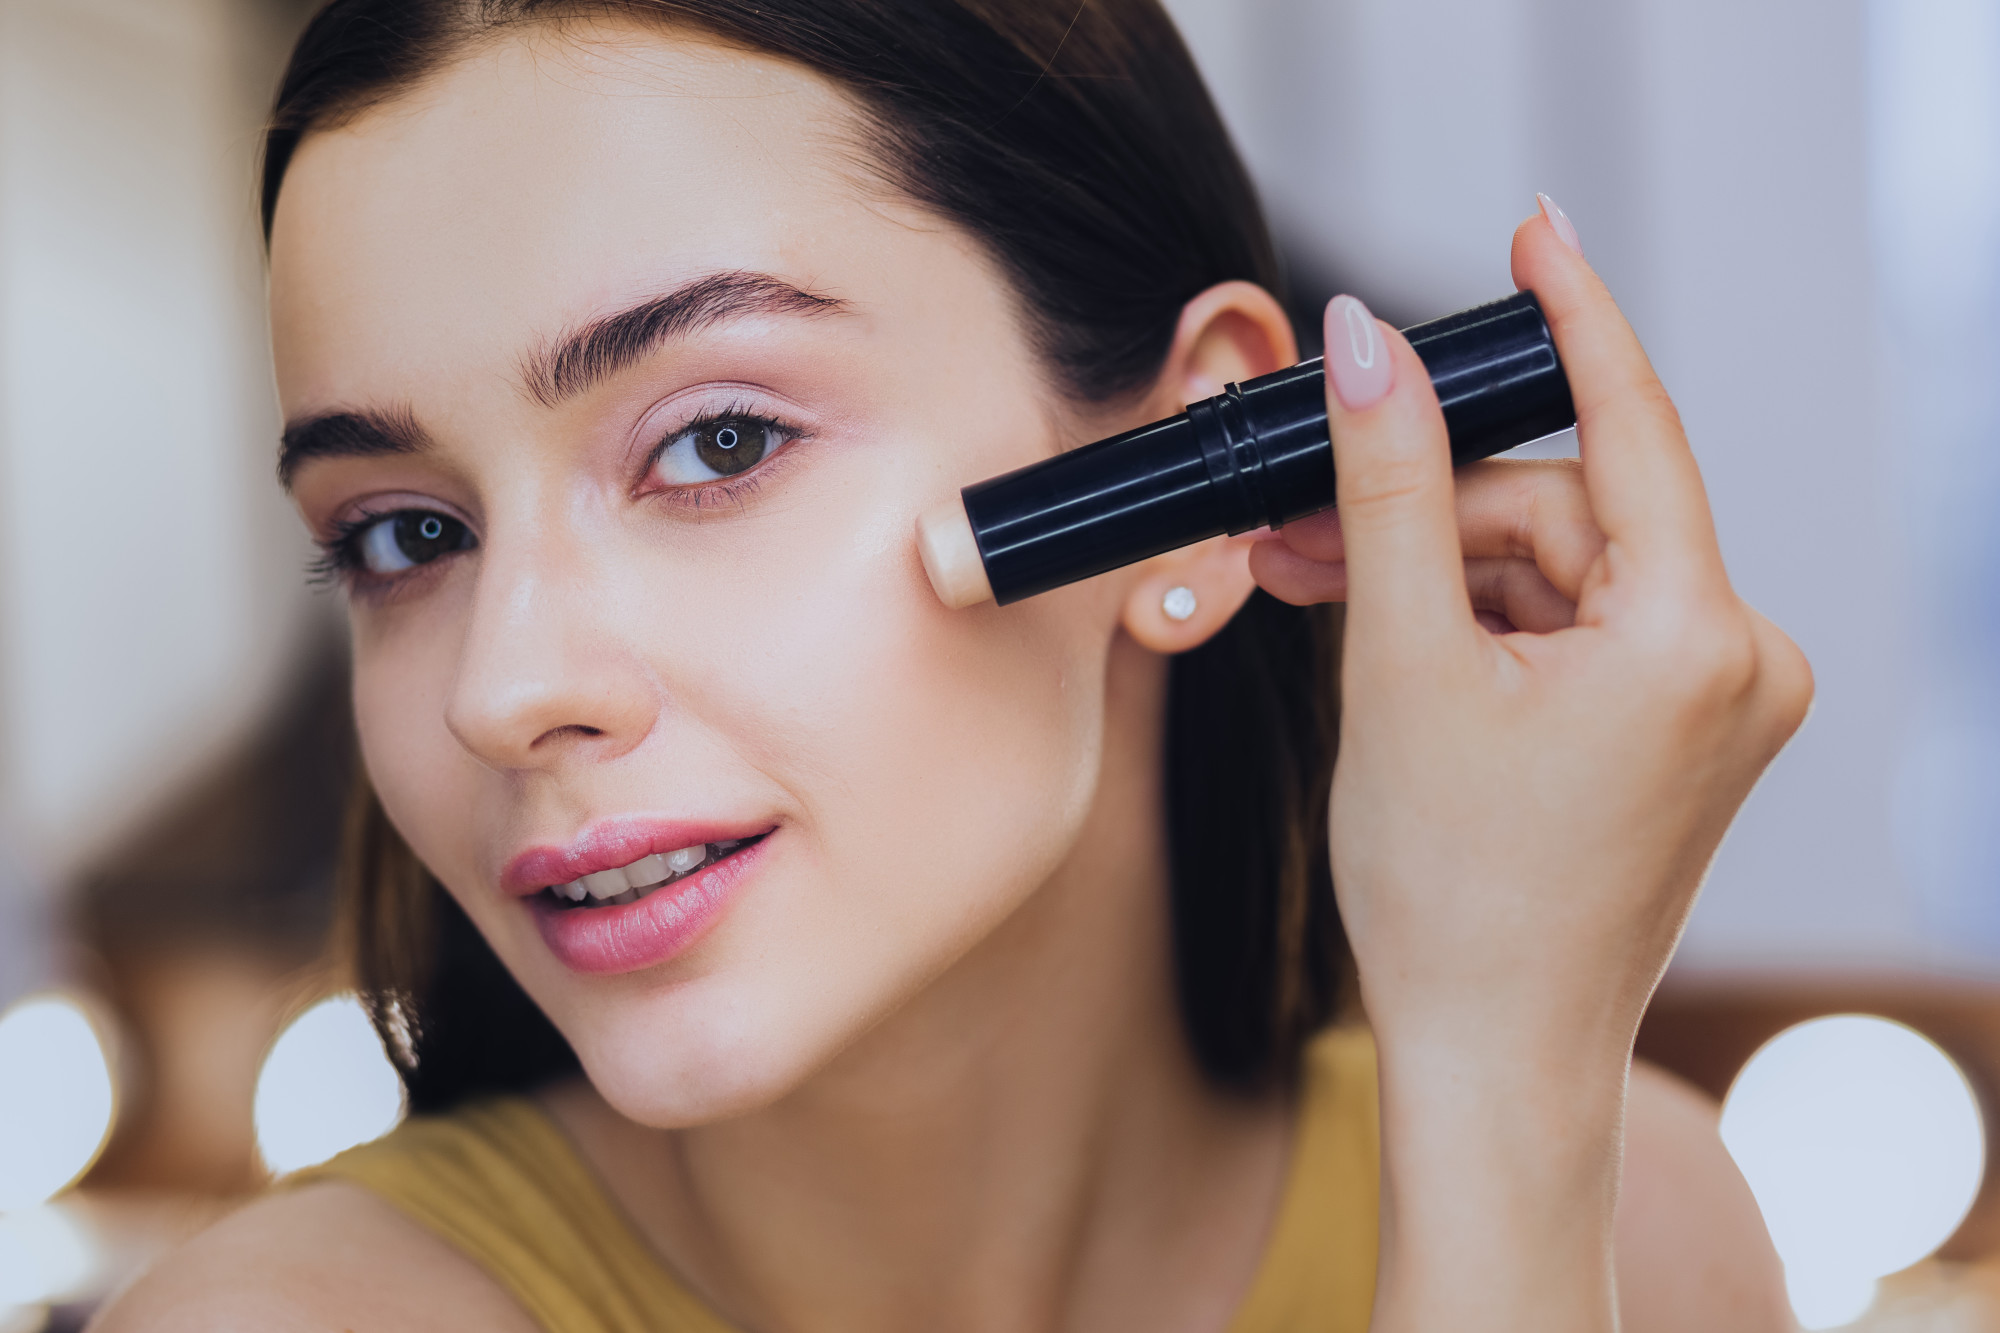 Japan Makeup Trends to Follow in 2020